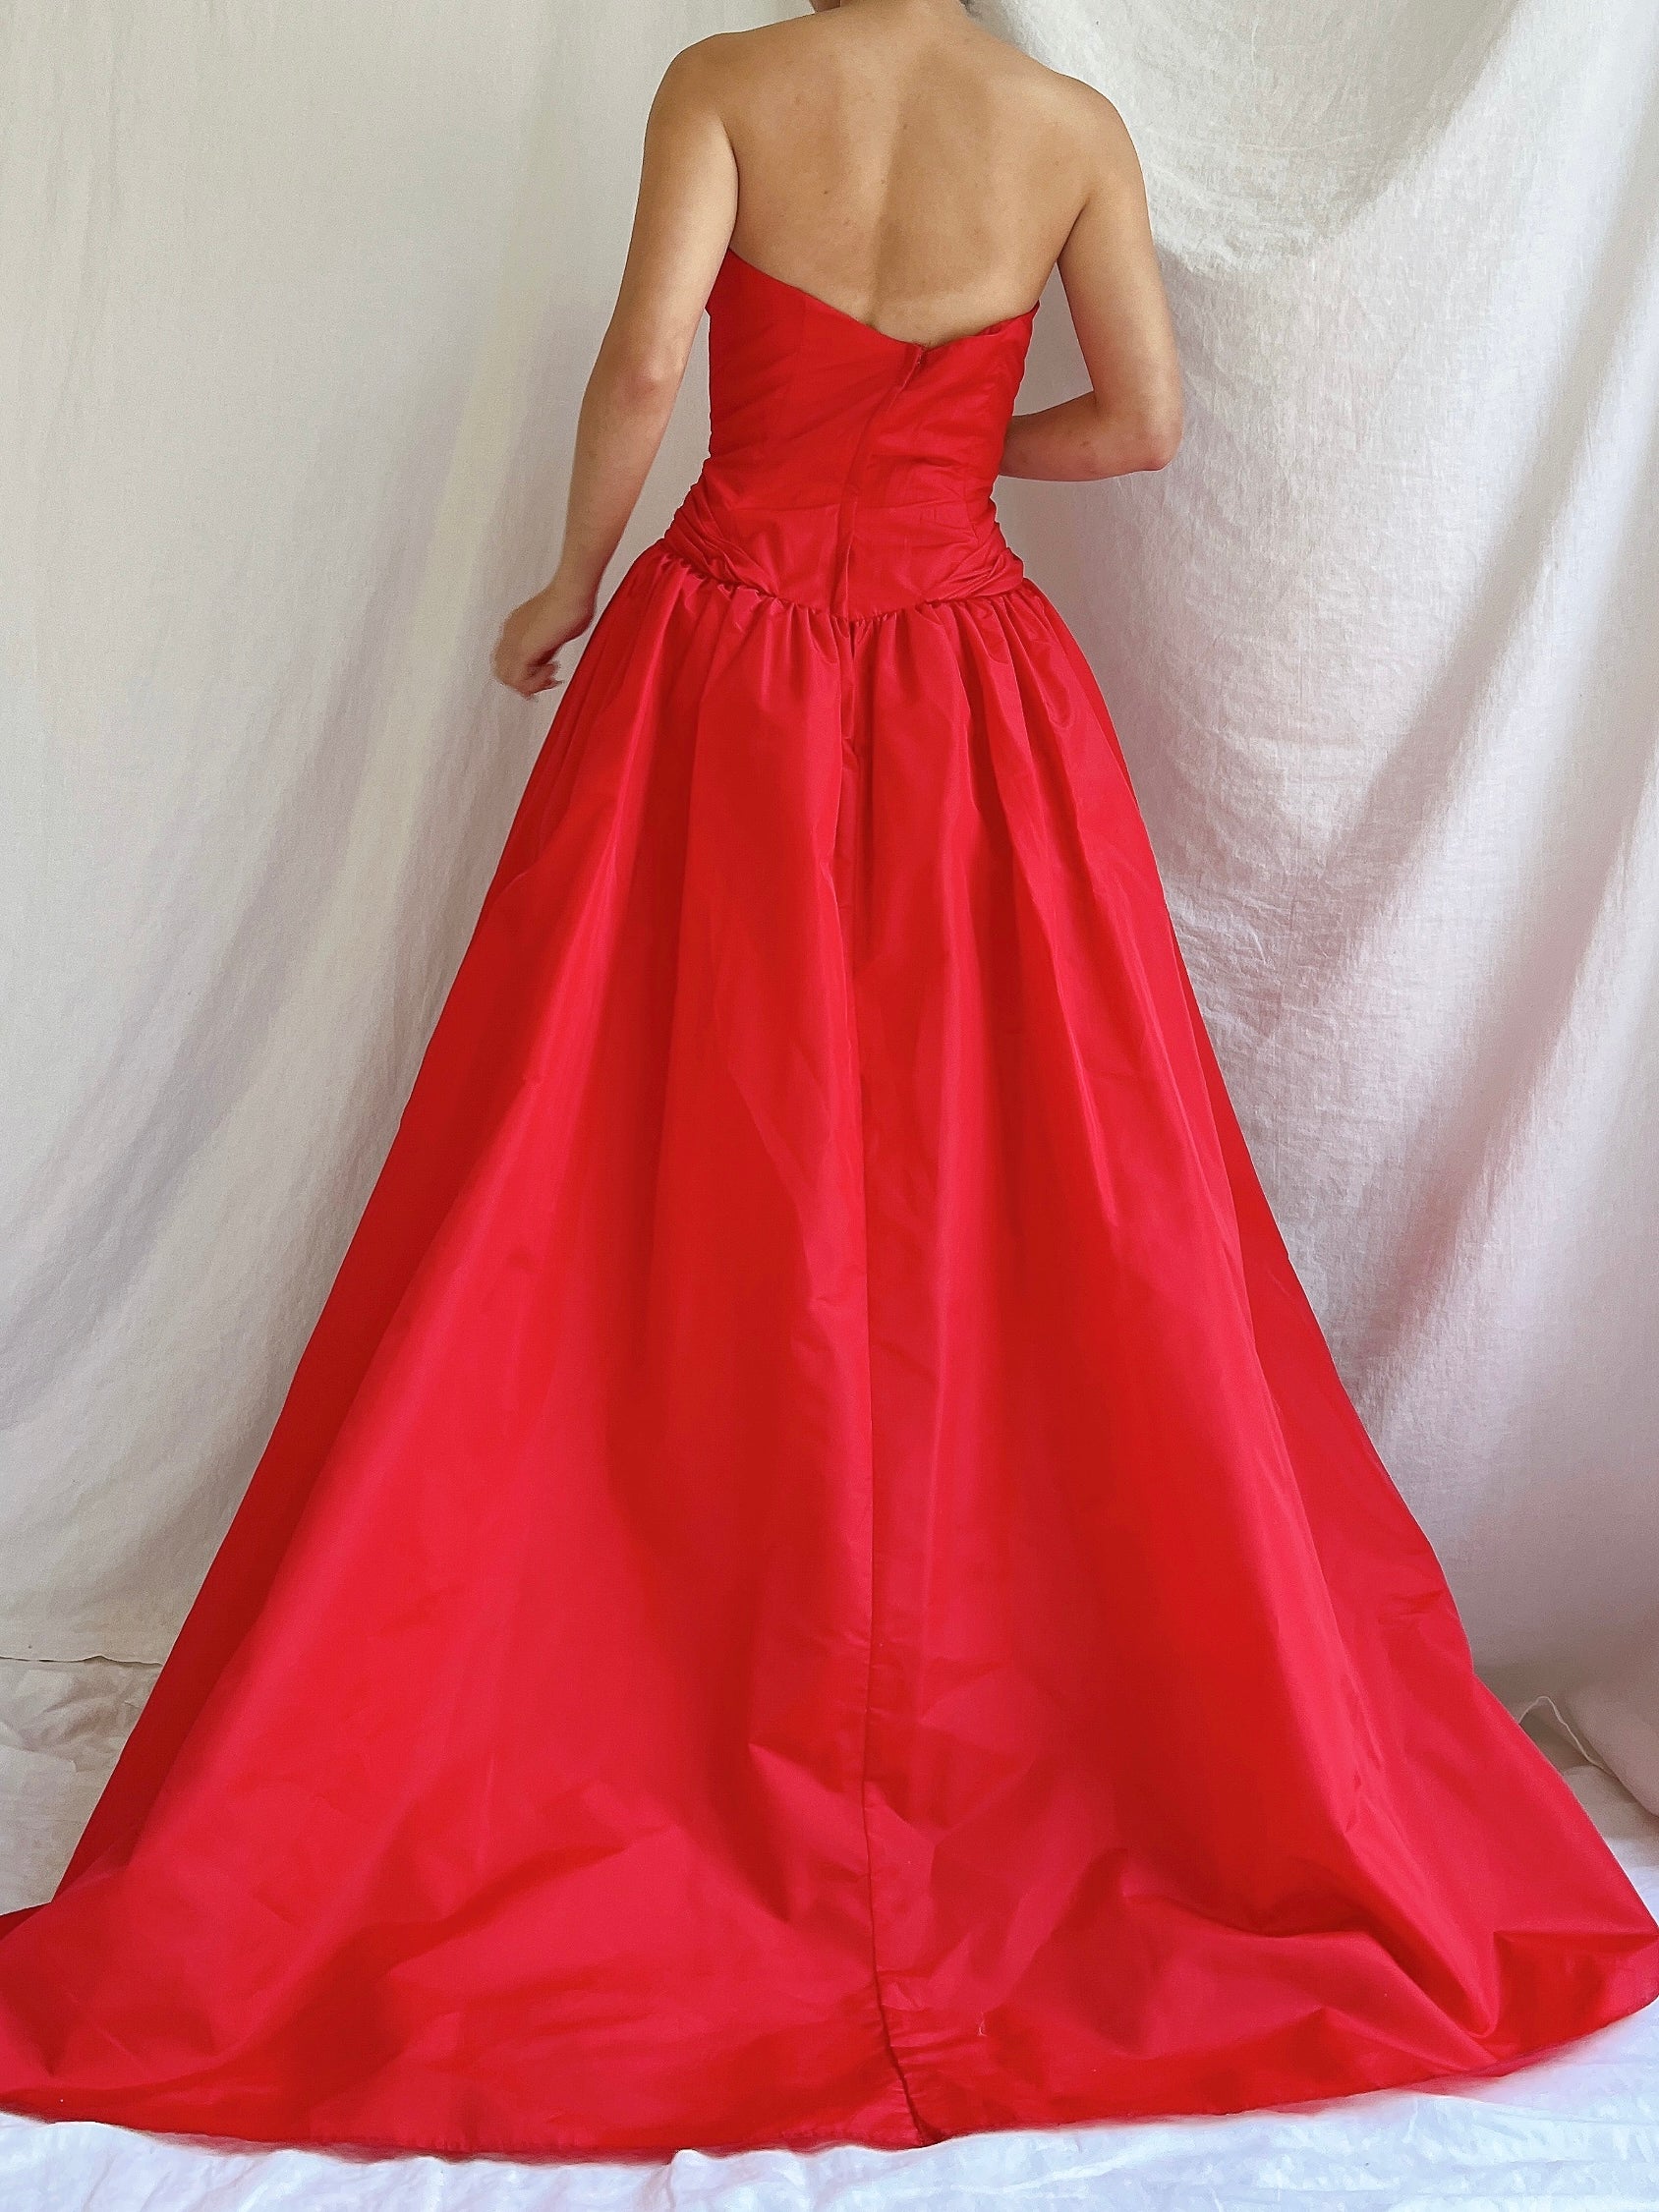 Vintage Victor Costa Rose Red Pleated Column Gown - M